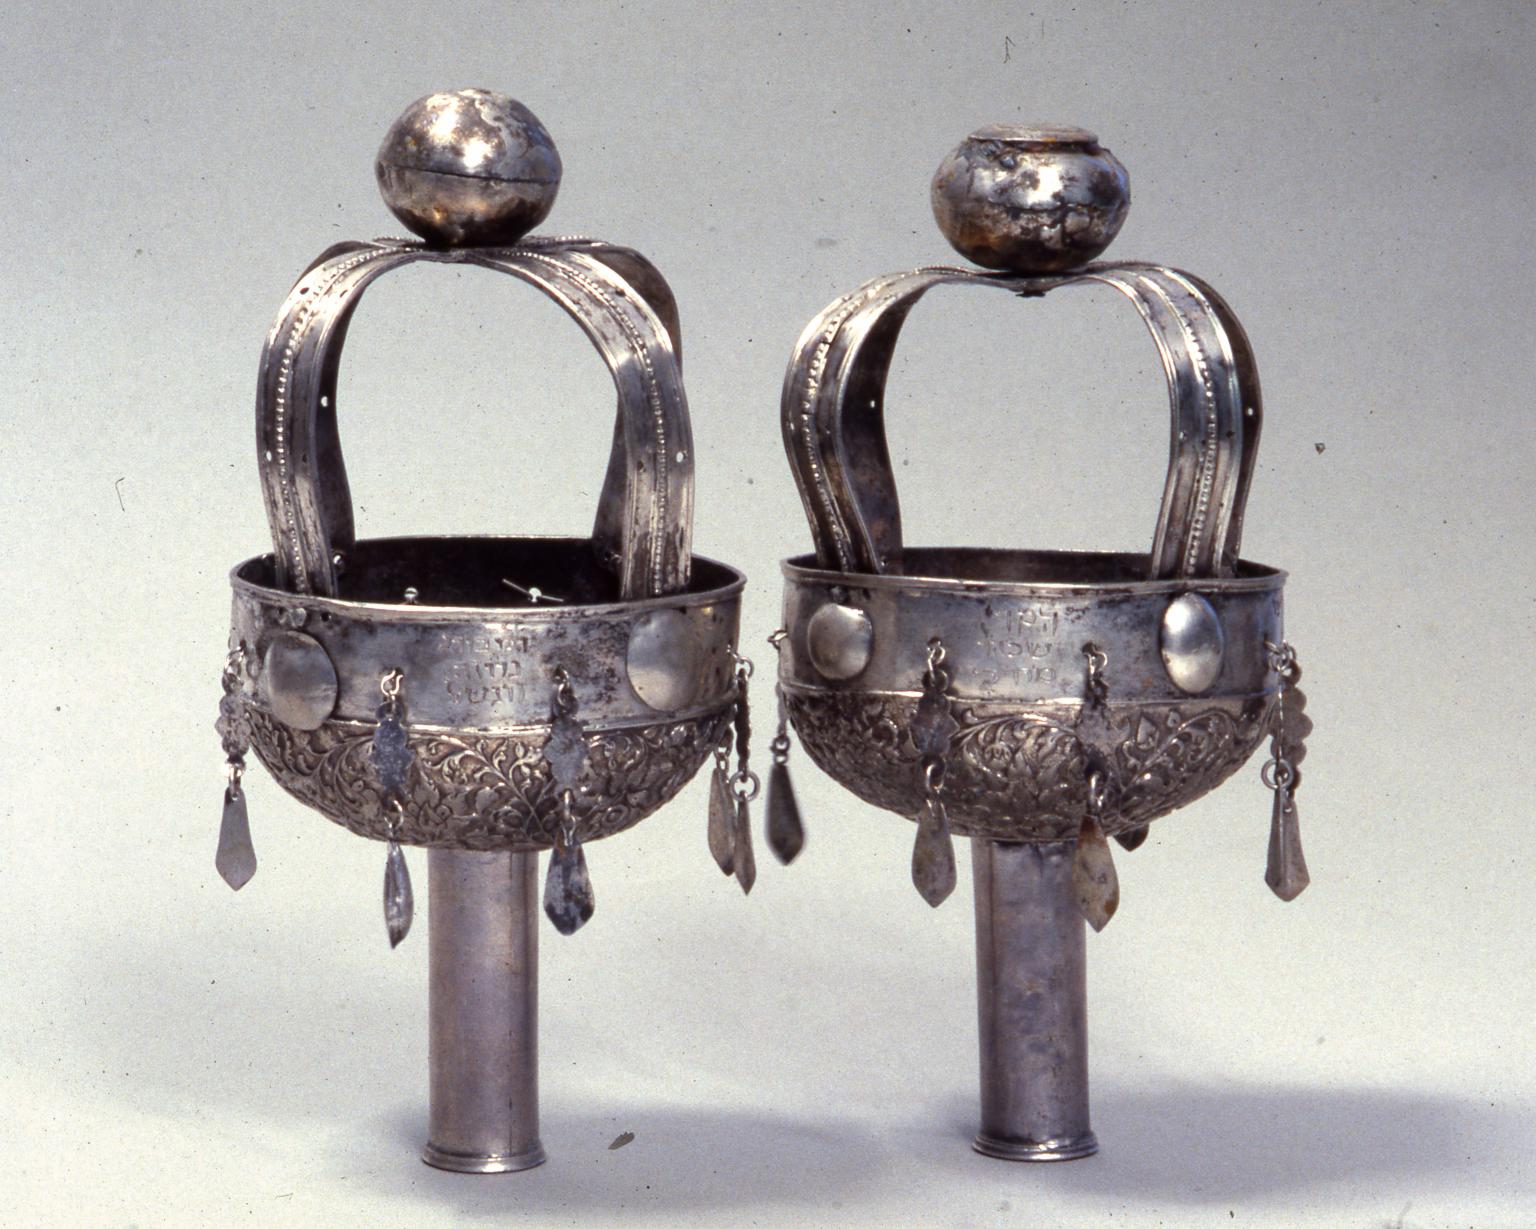 Pair of finials with balls on top.